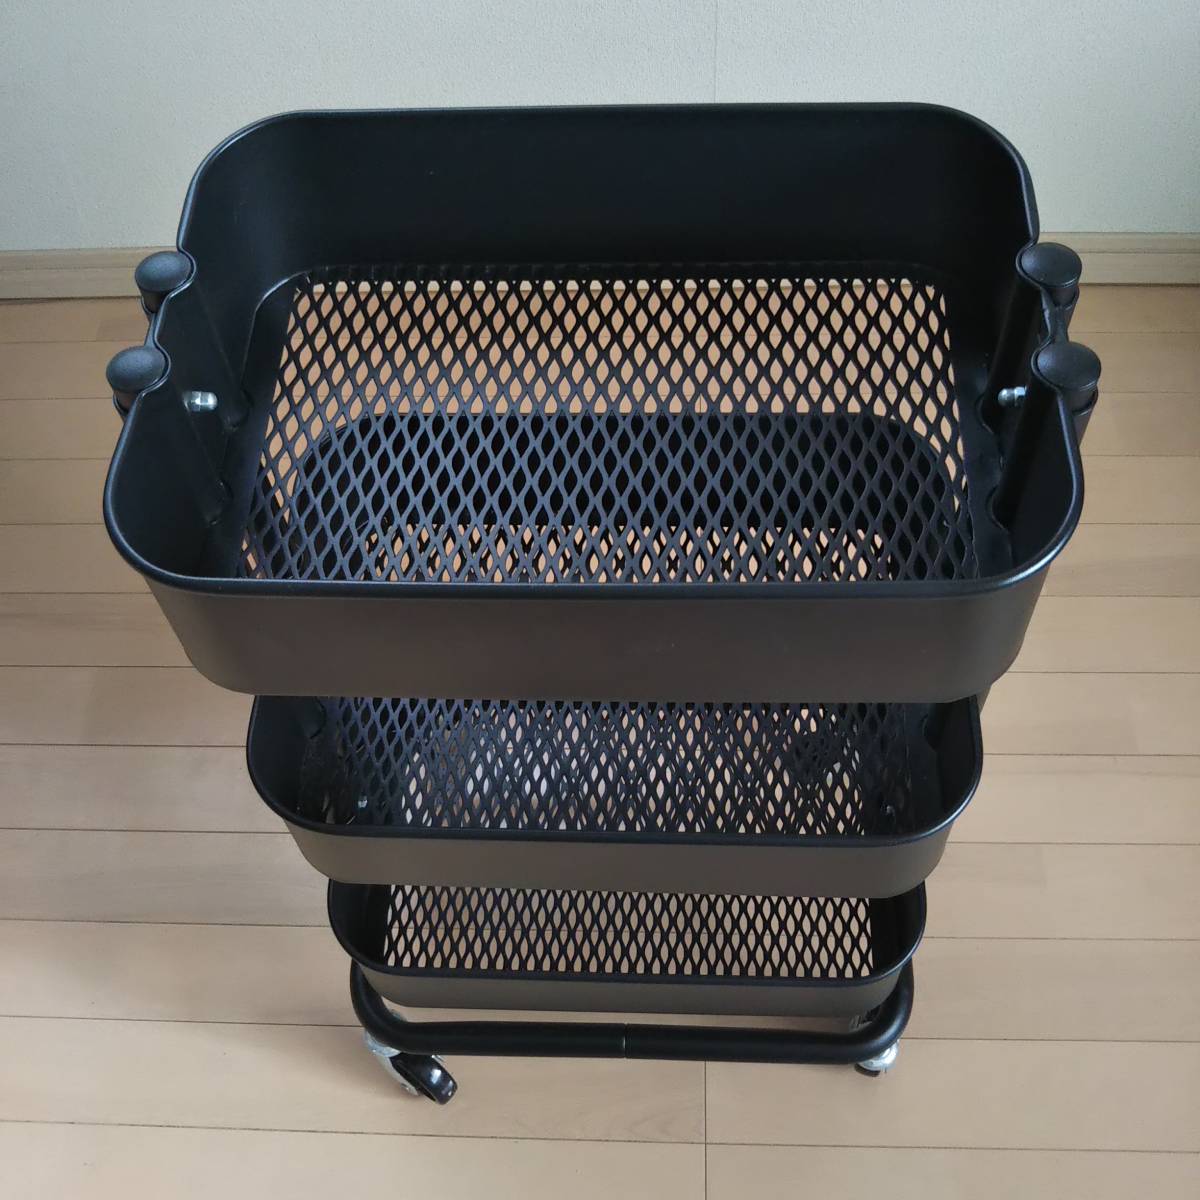 *[IKEA] Ikea RASHULT with casters 3 step storage Wagon black approximately width 33× length 24× height 65cm*